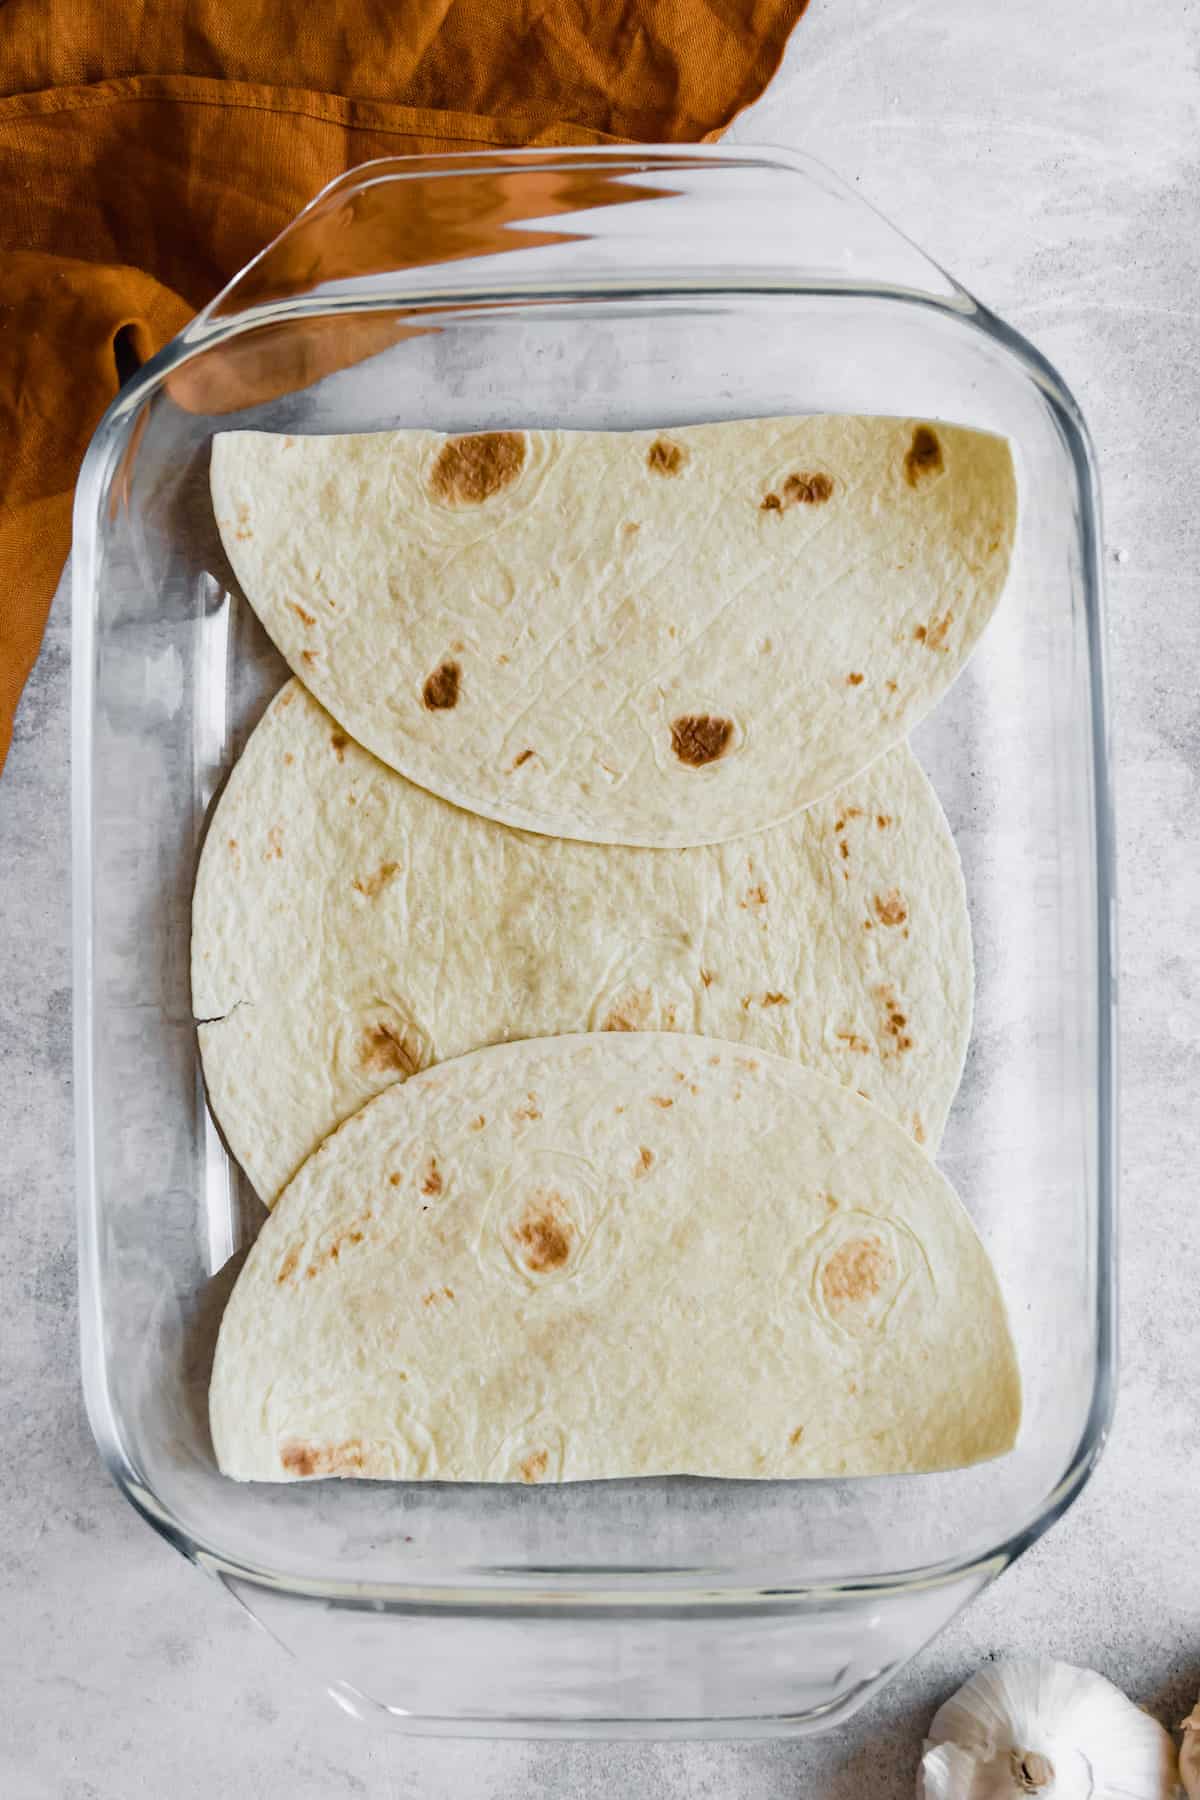 A Layer of Soft Corn Tortillas in a Glass Baking Dish